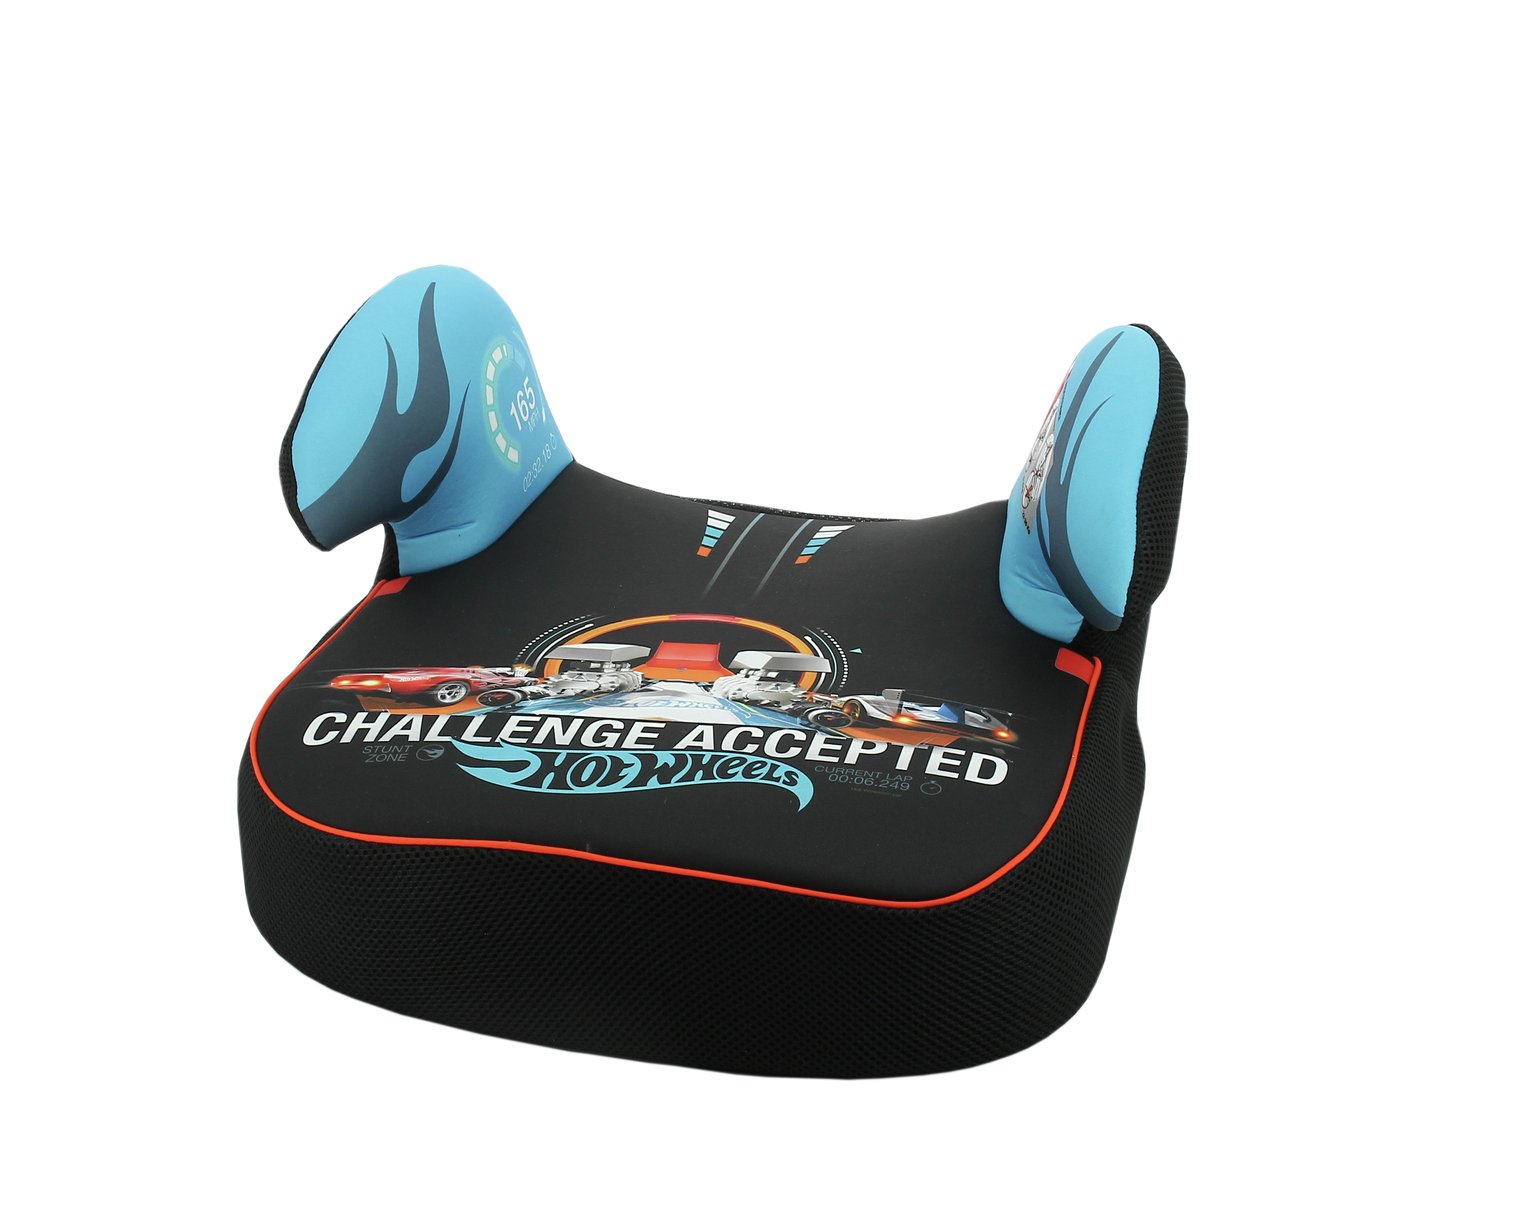 Hot Wheels Challenge Accepted Dream Group 2/3 Booster Seat Review